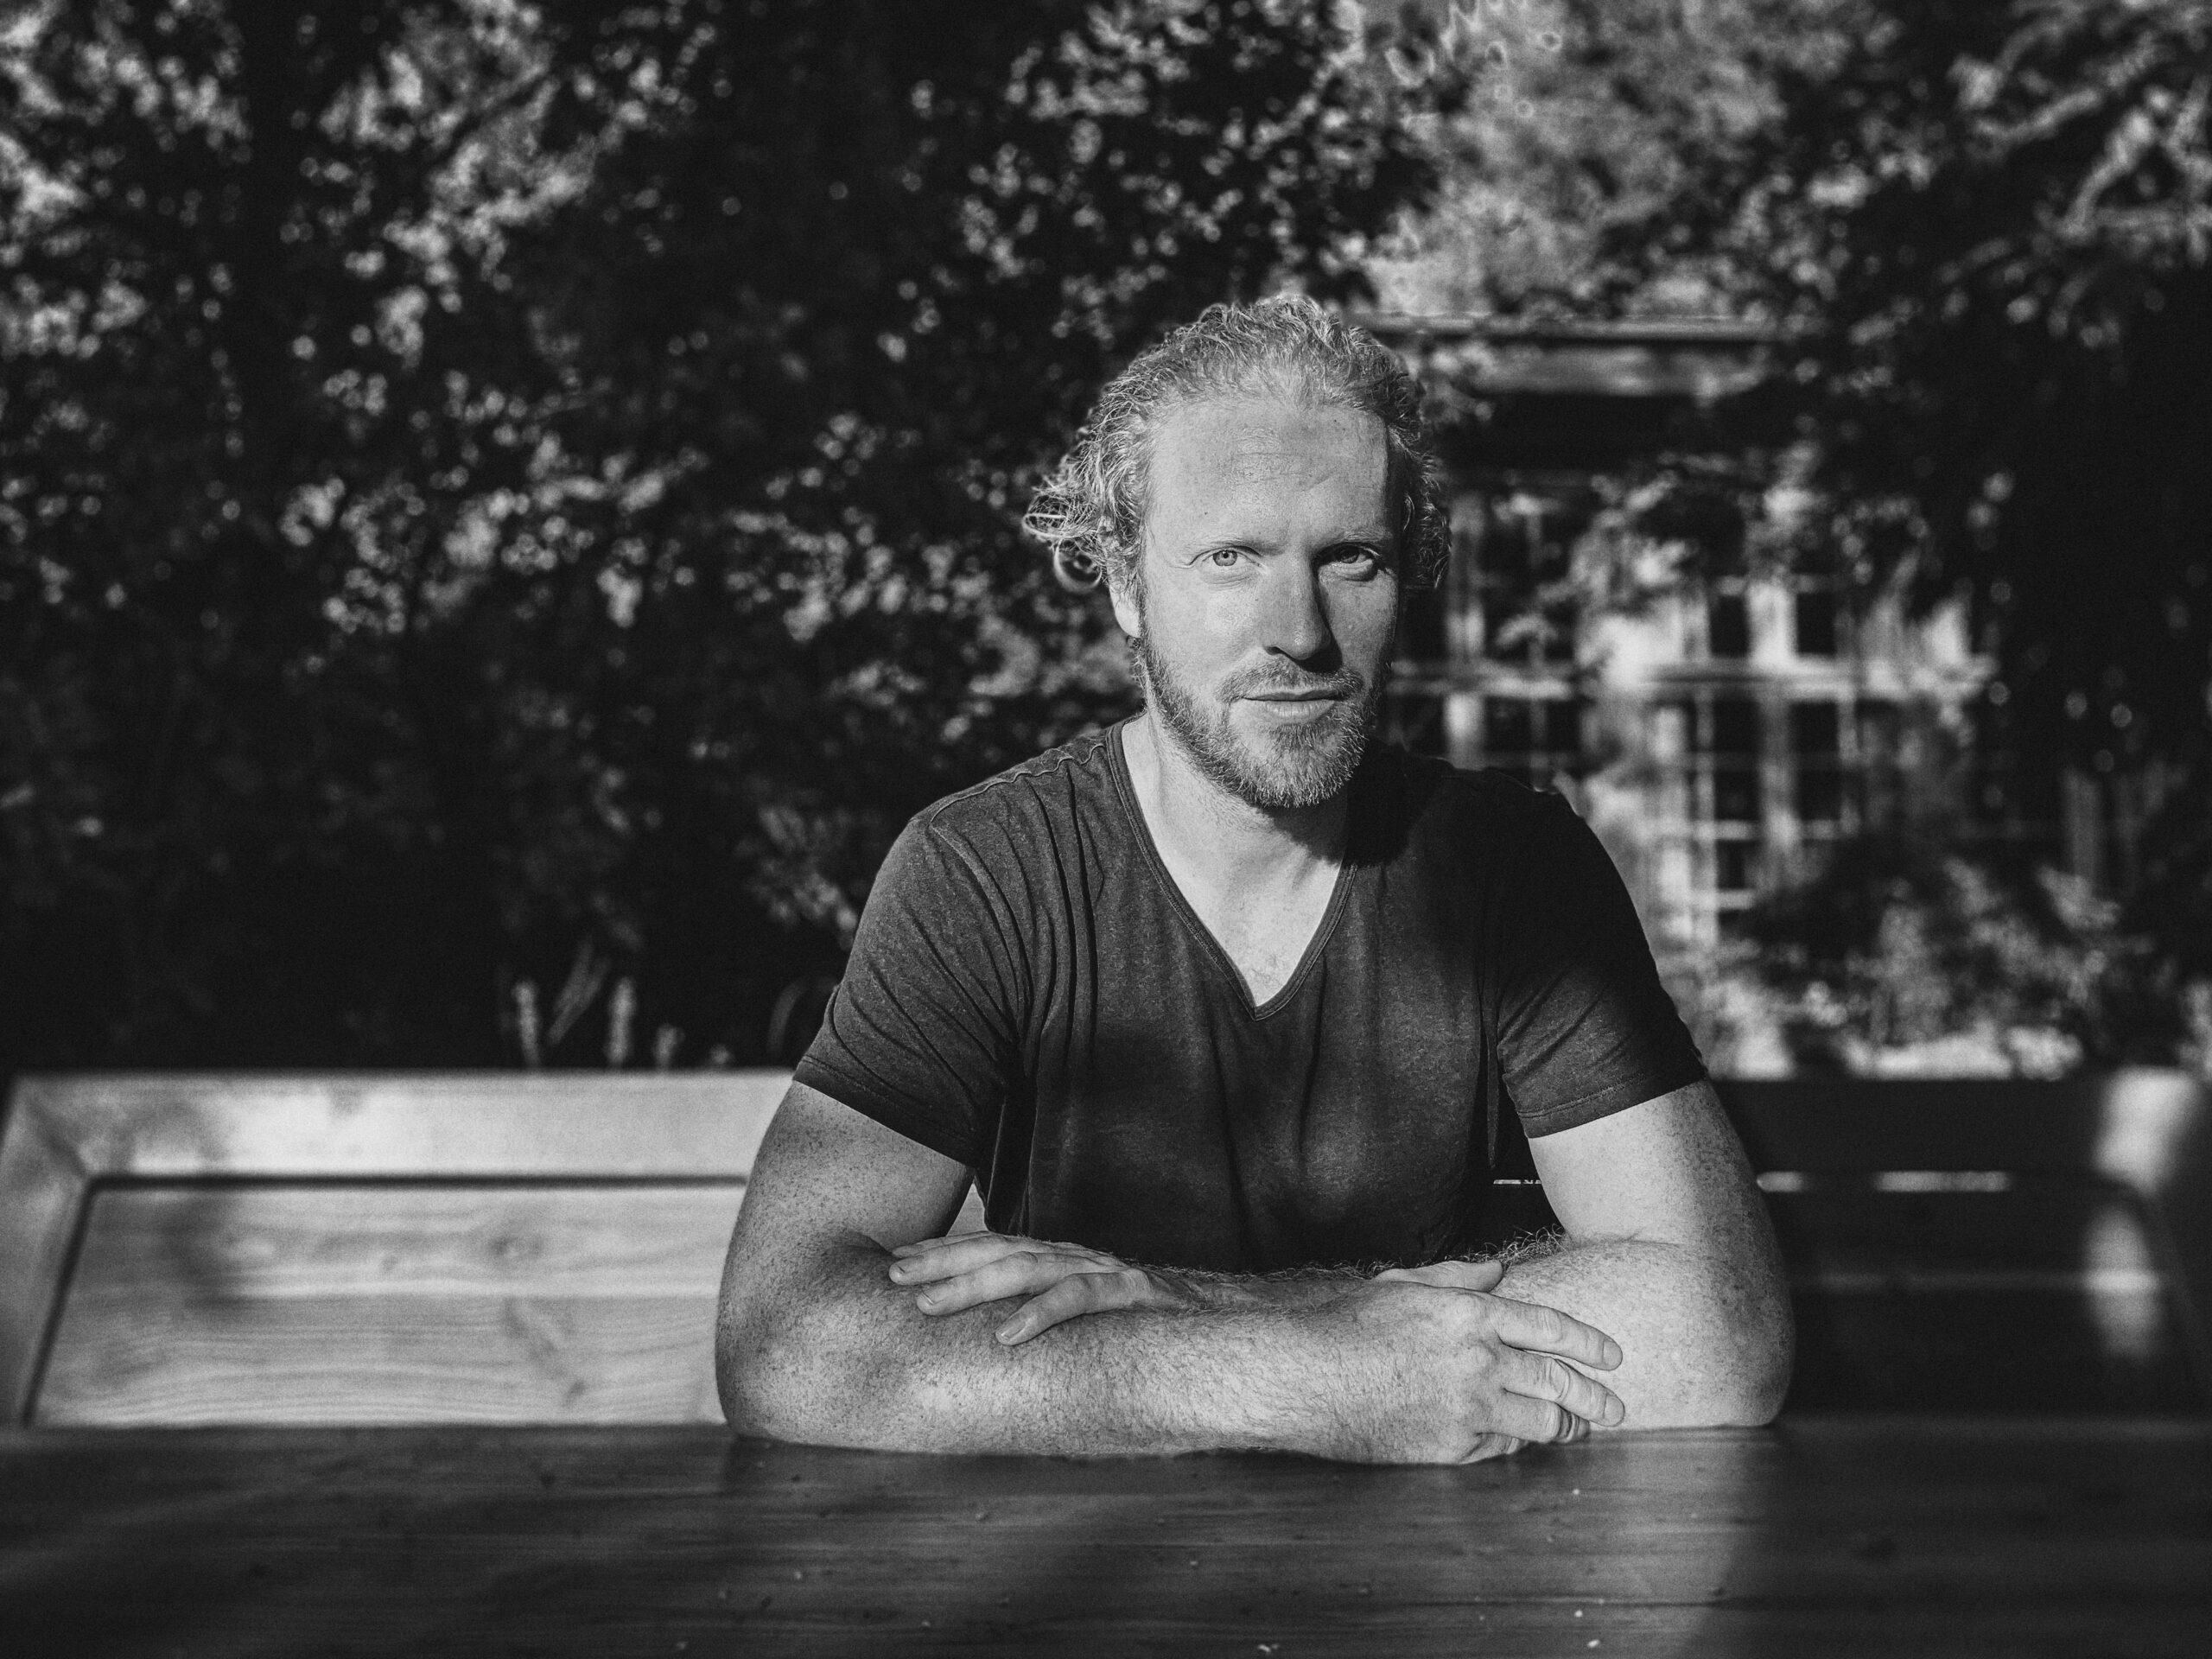 JONO MCCLEERY – Here I Am And There You Are